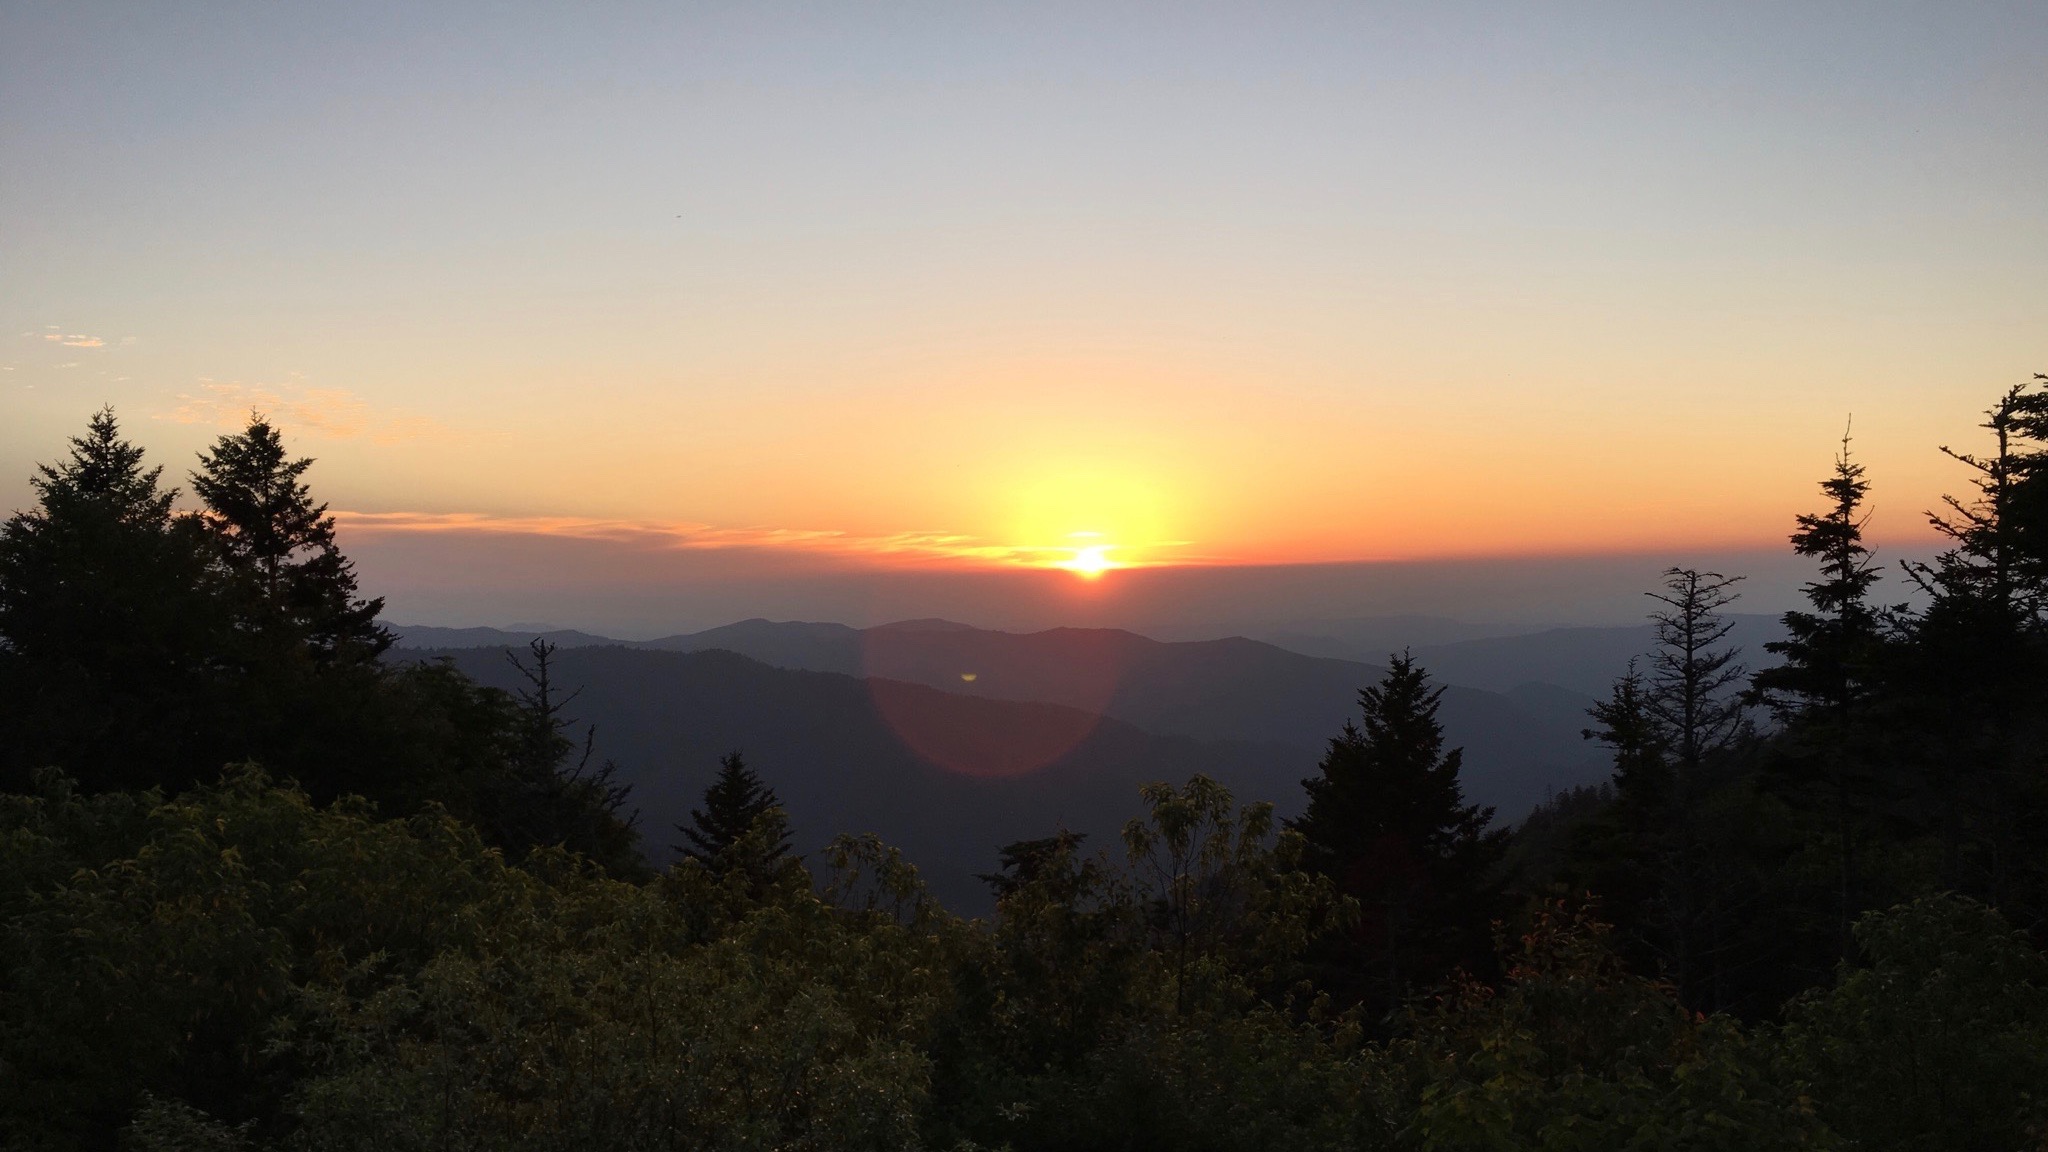 Smoky Mountains National Park - Photo of a sunset during one of our hikes